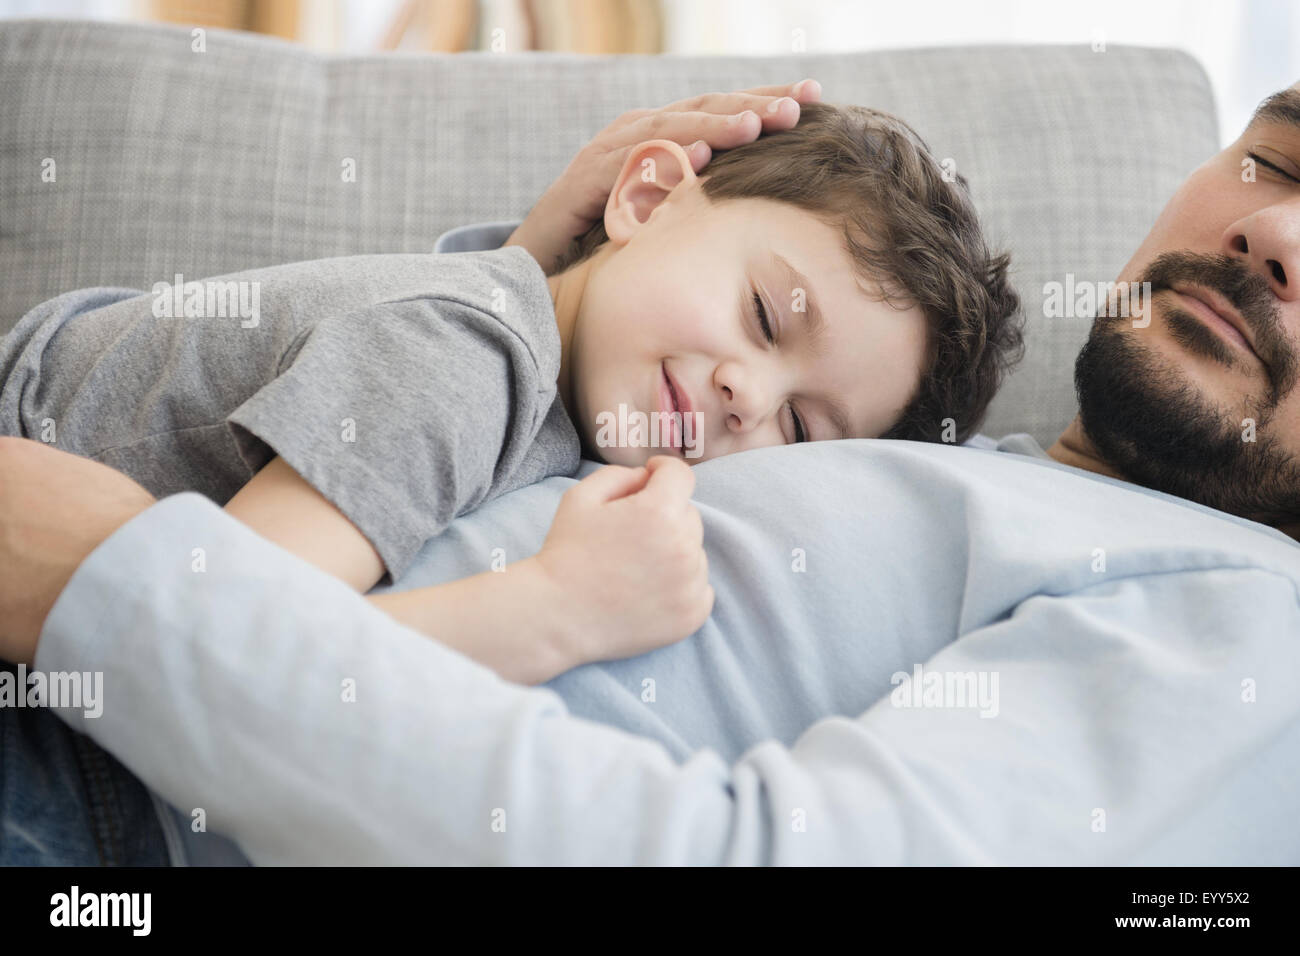 Caucasian father and son napping on sofa Stock Photo